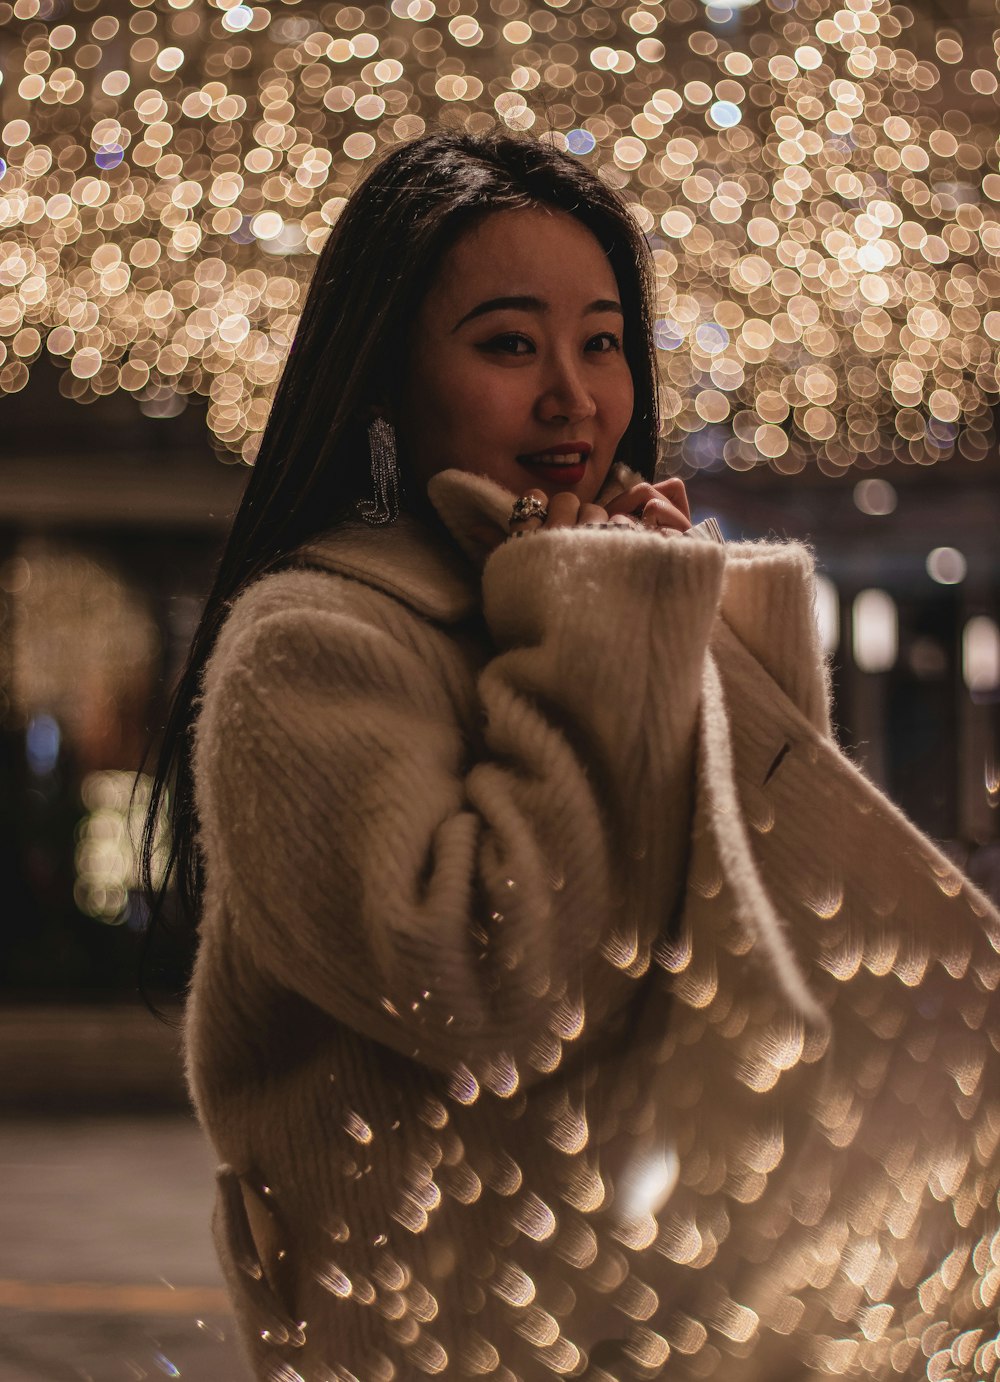 woman in brown coat holding lighted string lights